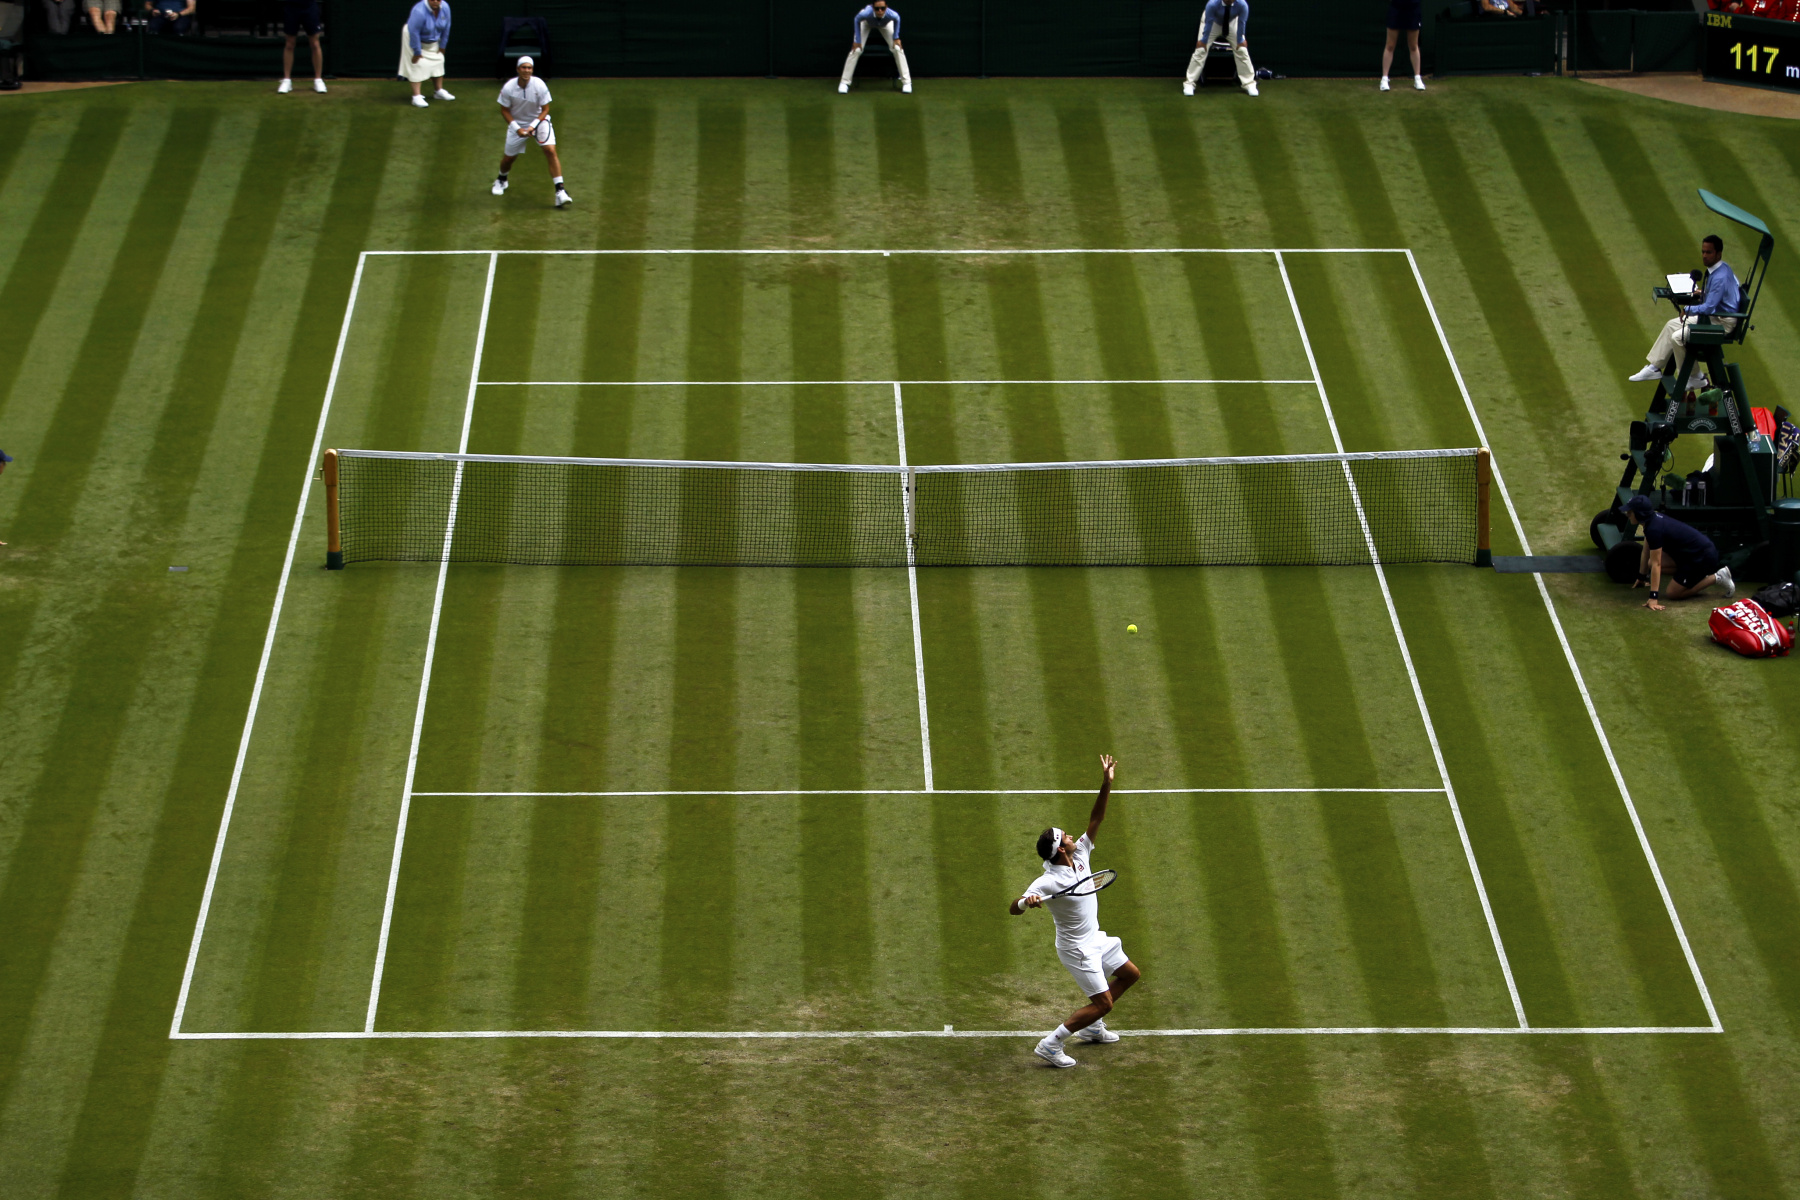 <h4 style="text-transform:uppercase">Roger Federer on Centre Court at Wimbledon</h4>
<div class="captiontext">
The pristine lawn of Centre Court at Wimbledon through most of the 2000's has felt like Roger Federer's home.  His presence when on this most hallowed ground, can be felt like an aura and a force when he sets foot there, and his eight Wimbledon titles still the most by any male player.  Here he serves on this legendary court in 2018.
</div>




 : Limited Editions : Photography by Adam Stoltman: Sports Photography, The Arts, Portraiture, Travel, Photojournalism and Fine Art in New York